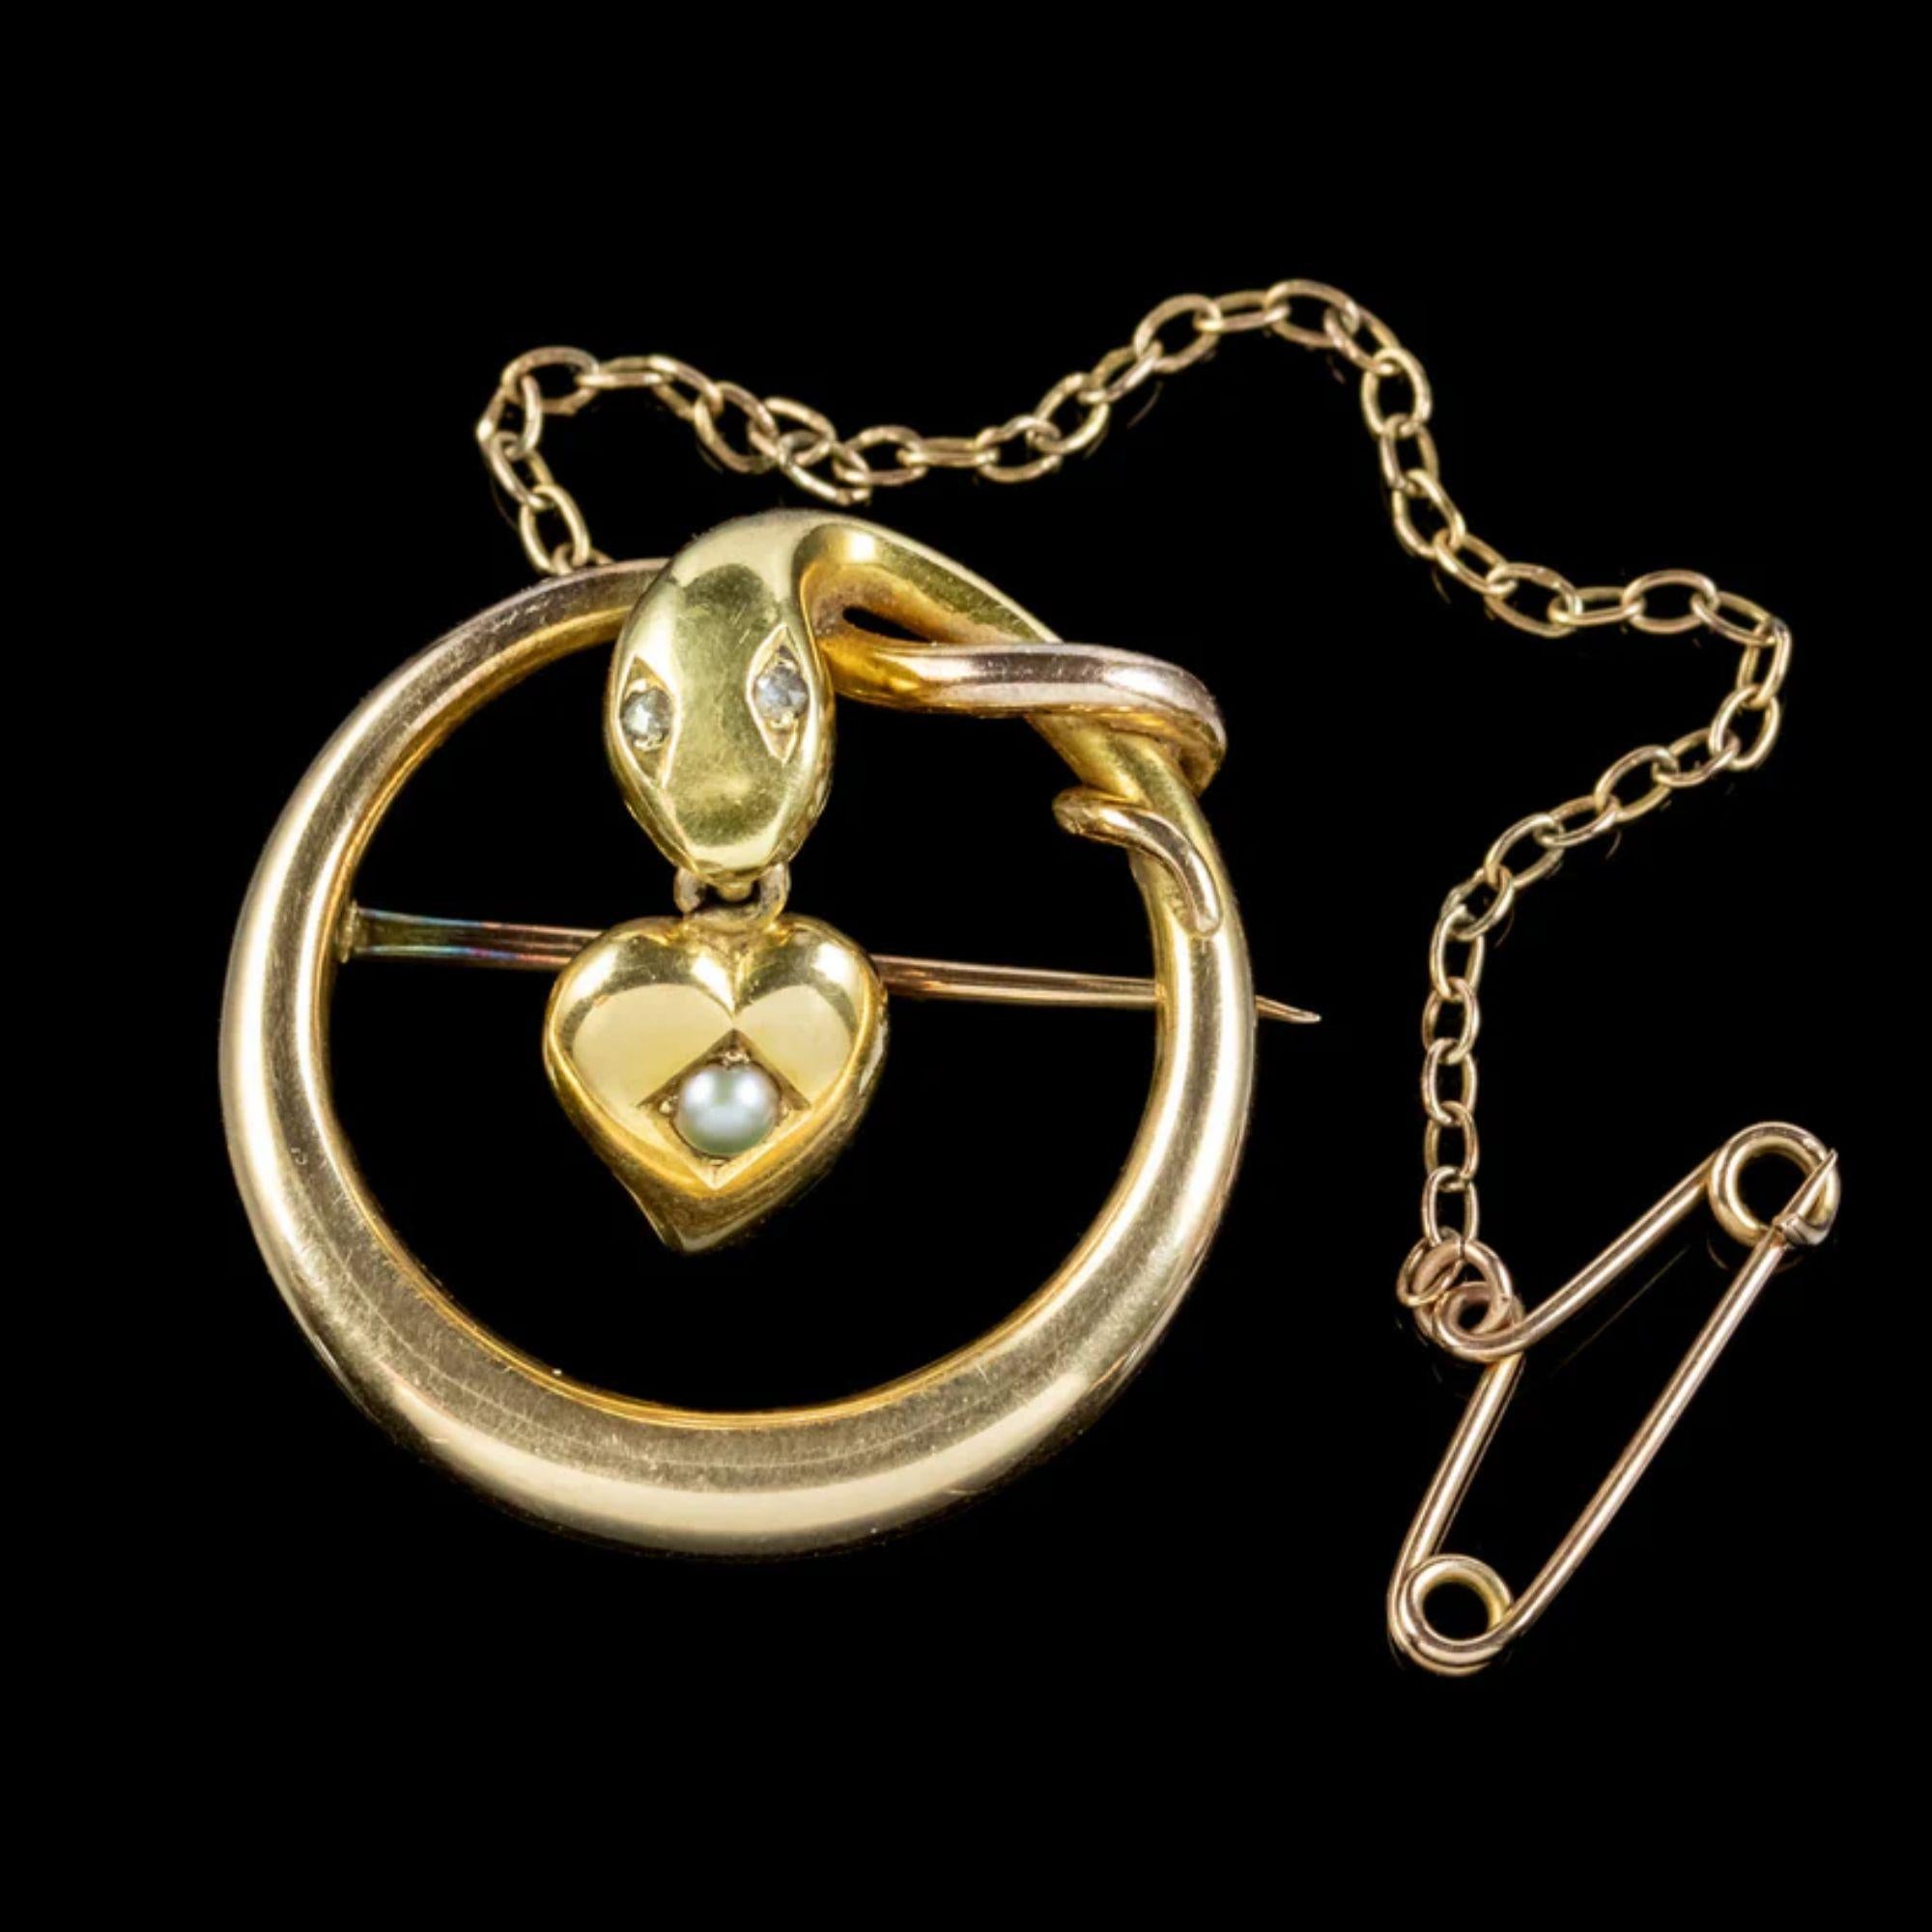 A fabulous Antique Victorian serpent brooch depicting a 15ct Yellow Gold snake with twinkling Rose cut Diamond eyes and a witches heart dropper hanging from its mouth with a Pearl in the centre.

Serpent jewellery was popular in the Victorian era